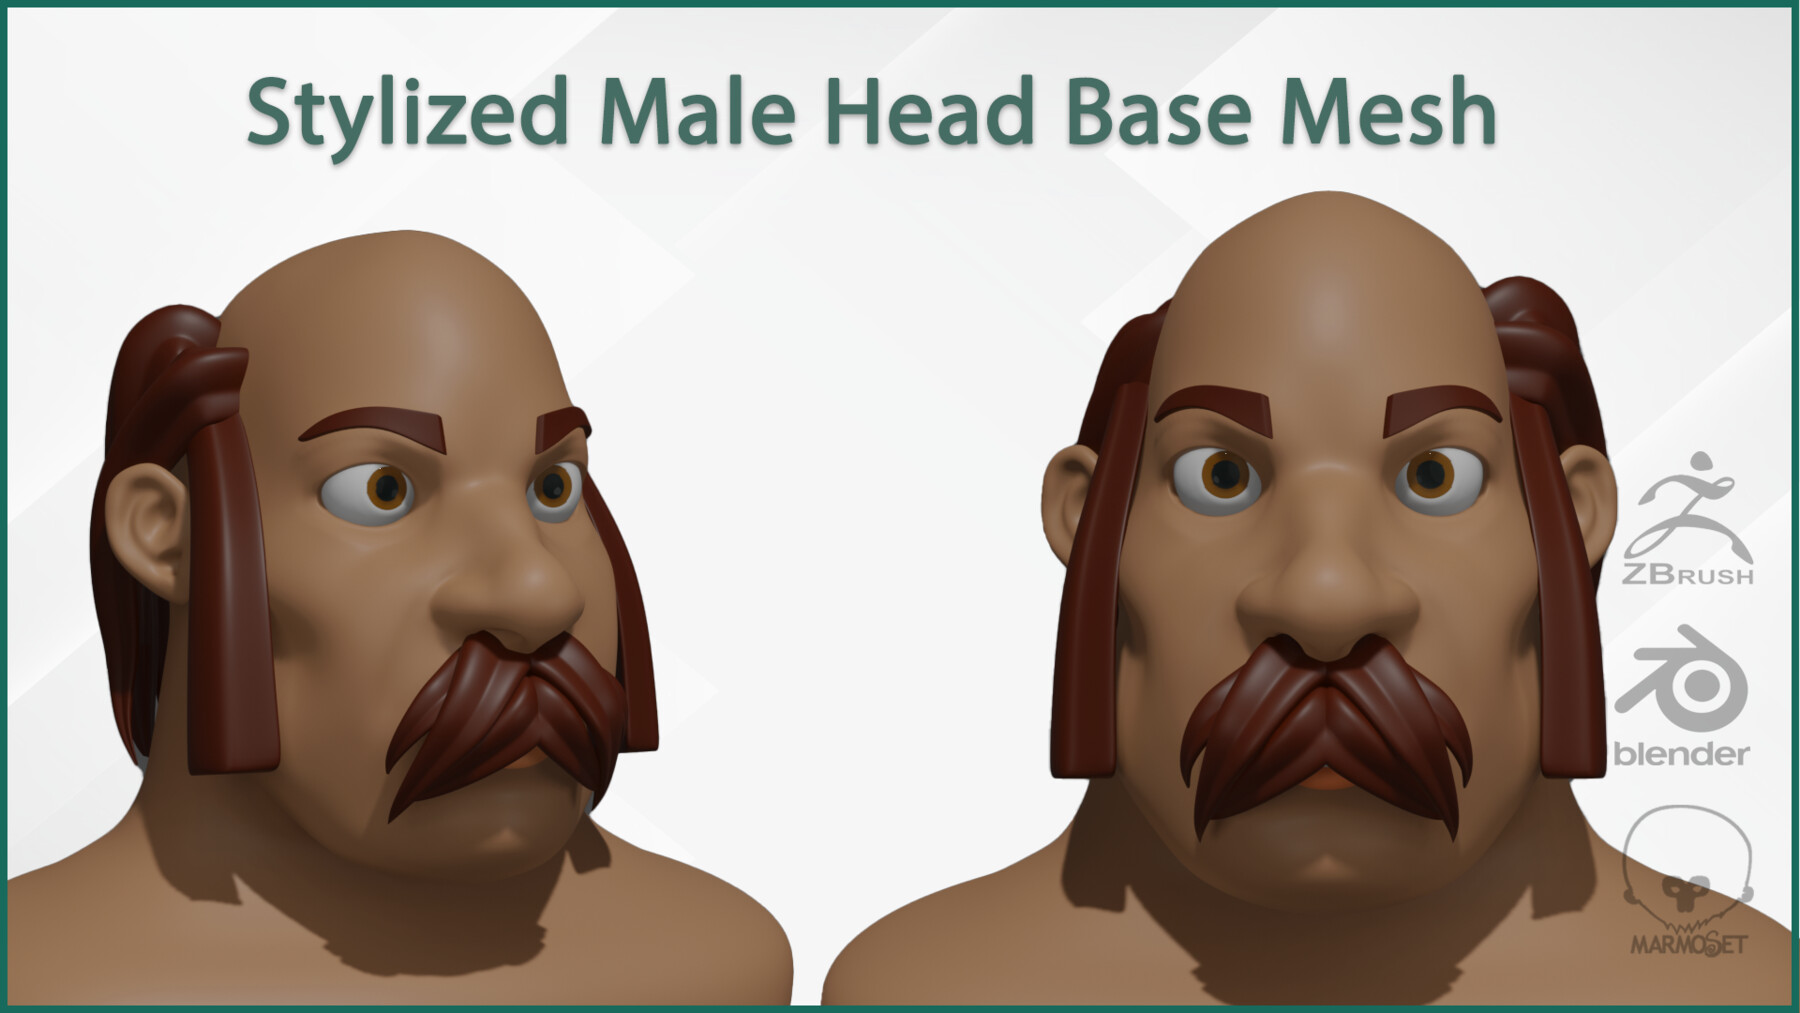 ArtStation - Stylized Male Head Base mesh with Hair in blender curve |  Resources